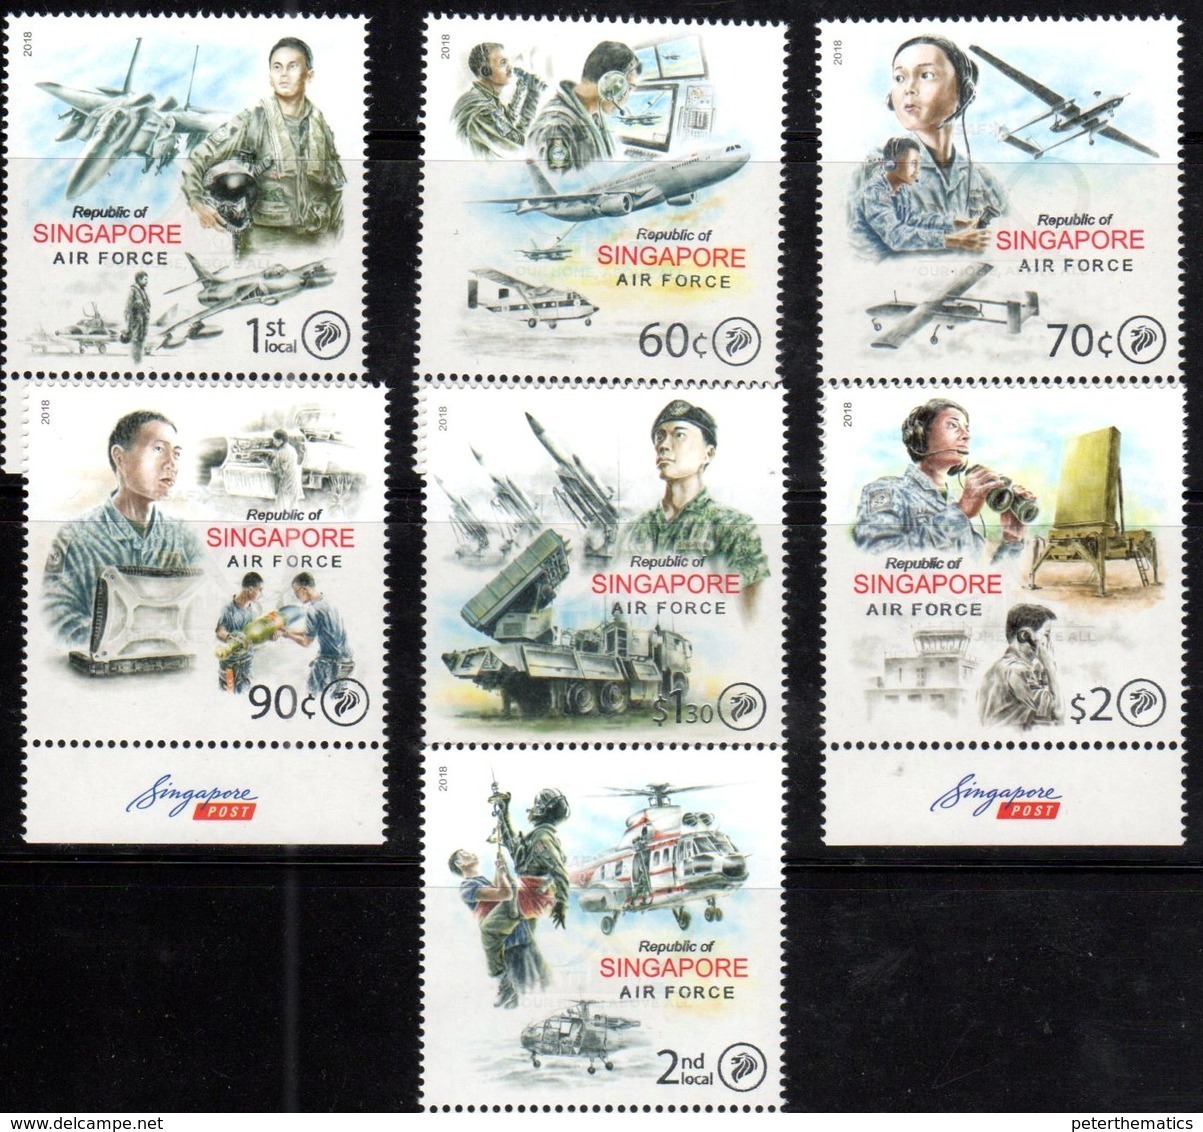 SINGAPORE, 2018, MNH, SINGAPORE AIR FORCE, PLANES, FIGHTERS, HELICOPTERS, MISSILES, DRONES, PILOTS, RECUE SERVICES, 7v - Avions